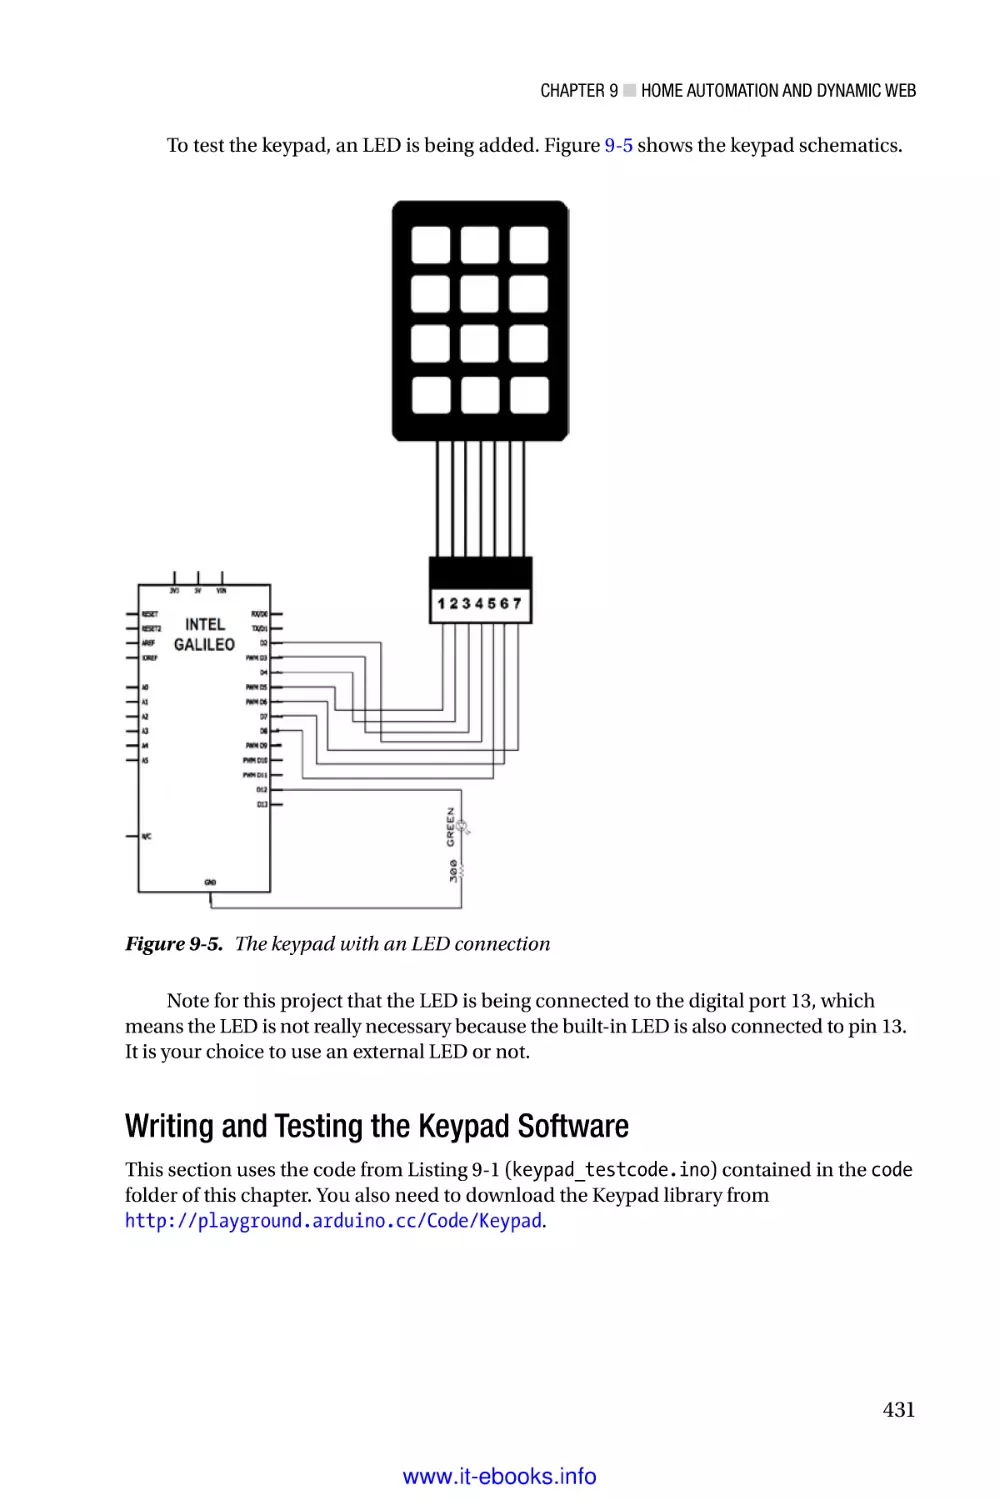 Writing and Testing the Keypad Software